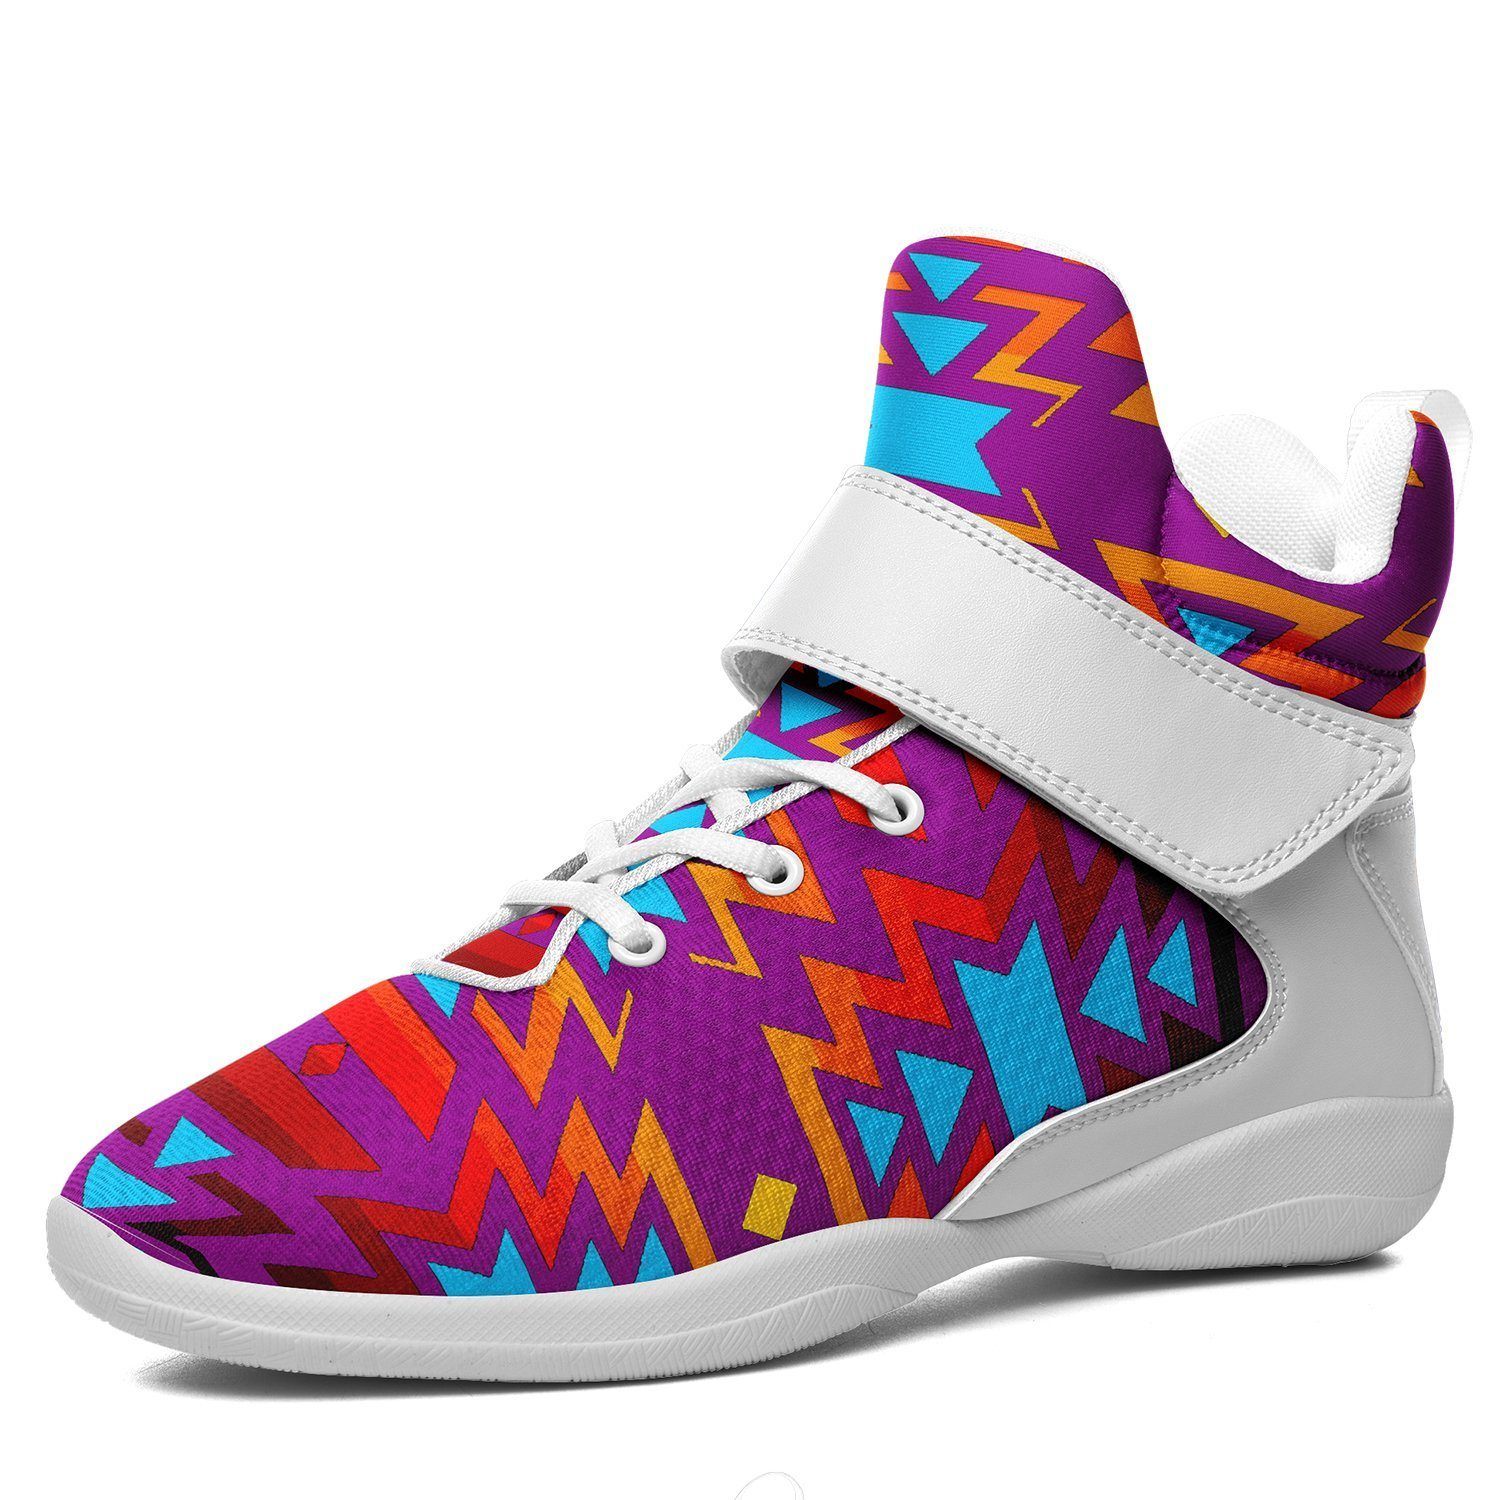 Fire Colors and Turquoise Purple Kid's Ipottaa Basketball / Sport High Top Shoes 49 Dzine US Child 12.5 / EUR 30 White Sole with White Strap 